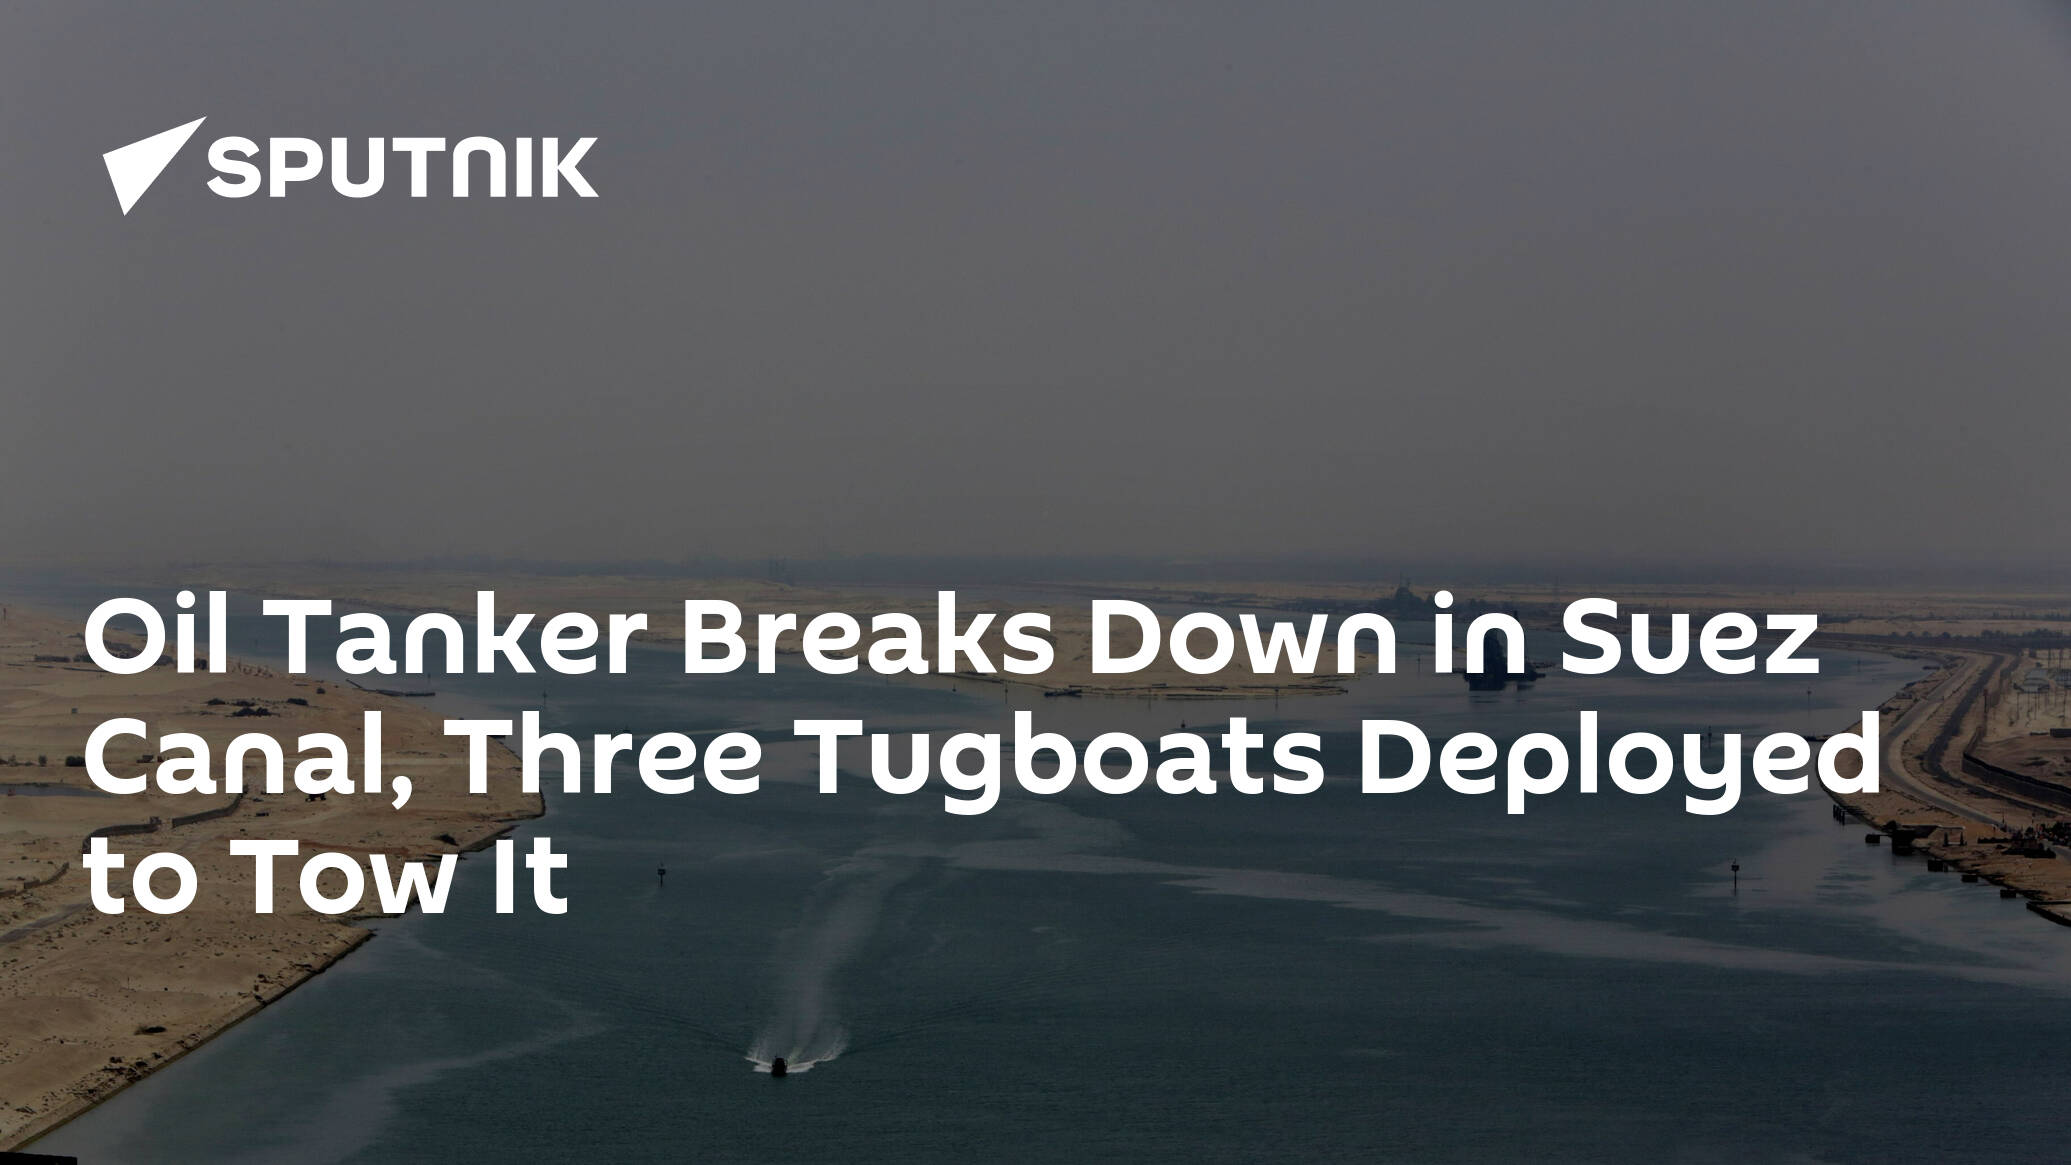 Oil Tanker Breaks Down in Suez Canal, Three Tugboats Deployed to Tow It